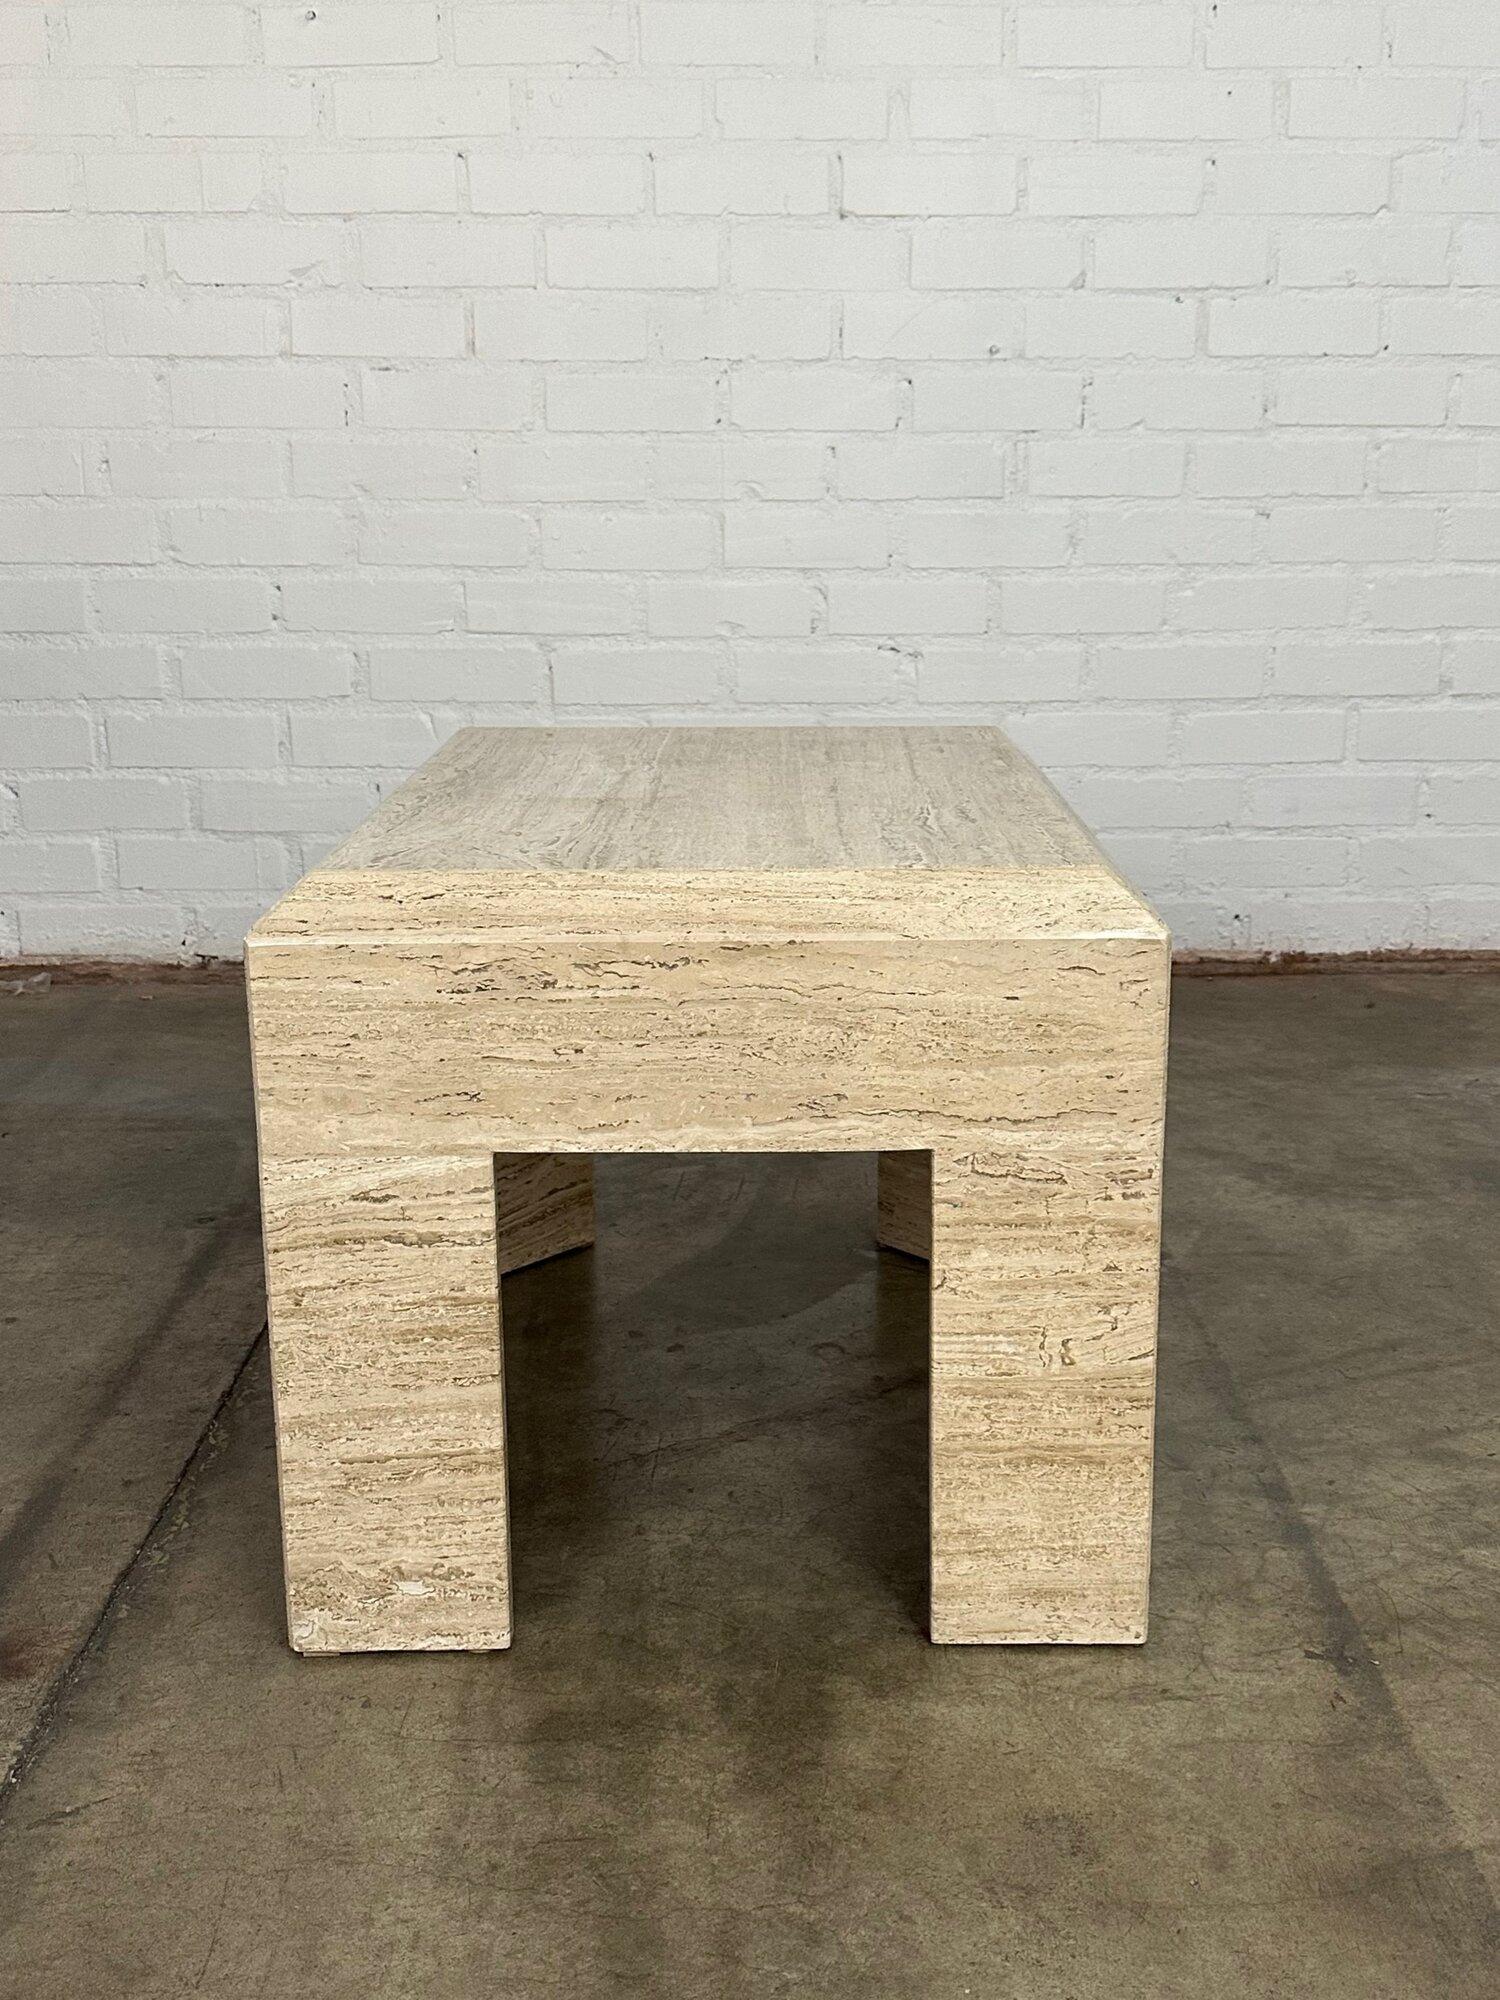 W30.5 D24 H23

Vintage side table in excellent condition. Item has no major areas of wear and no visible breaks. Table has a nice rounded edge with a slight bevel. Item is structurally sound and sturdy.